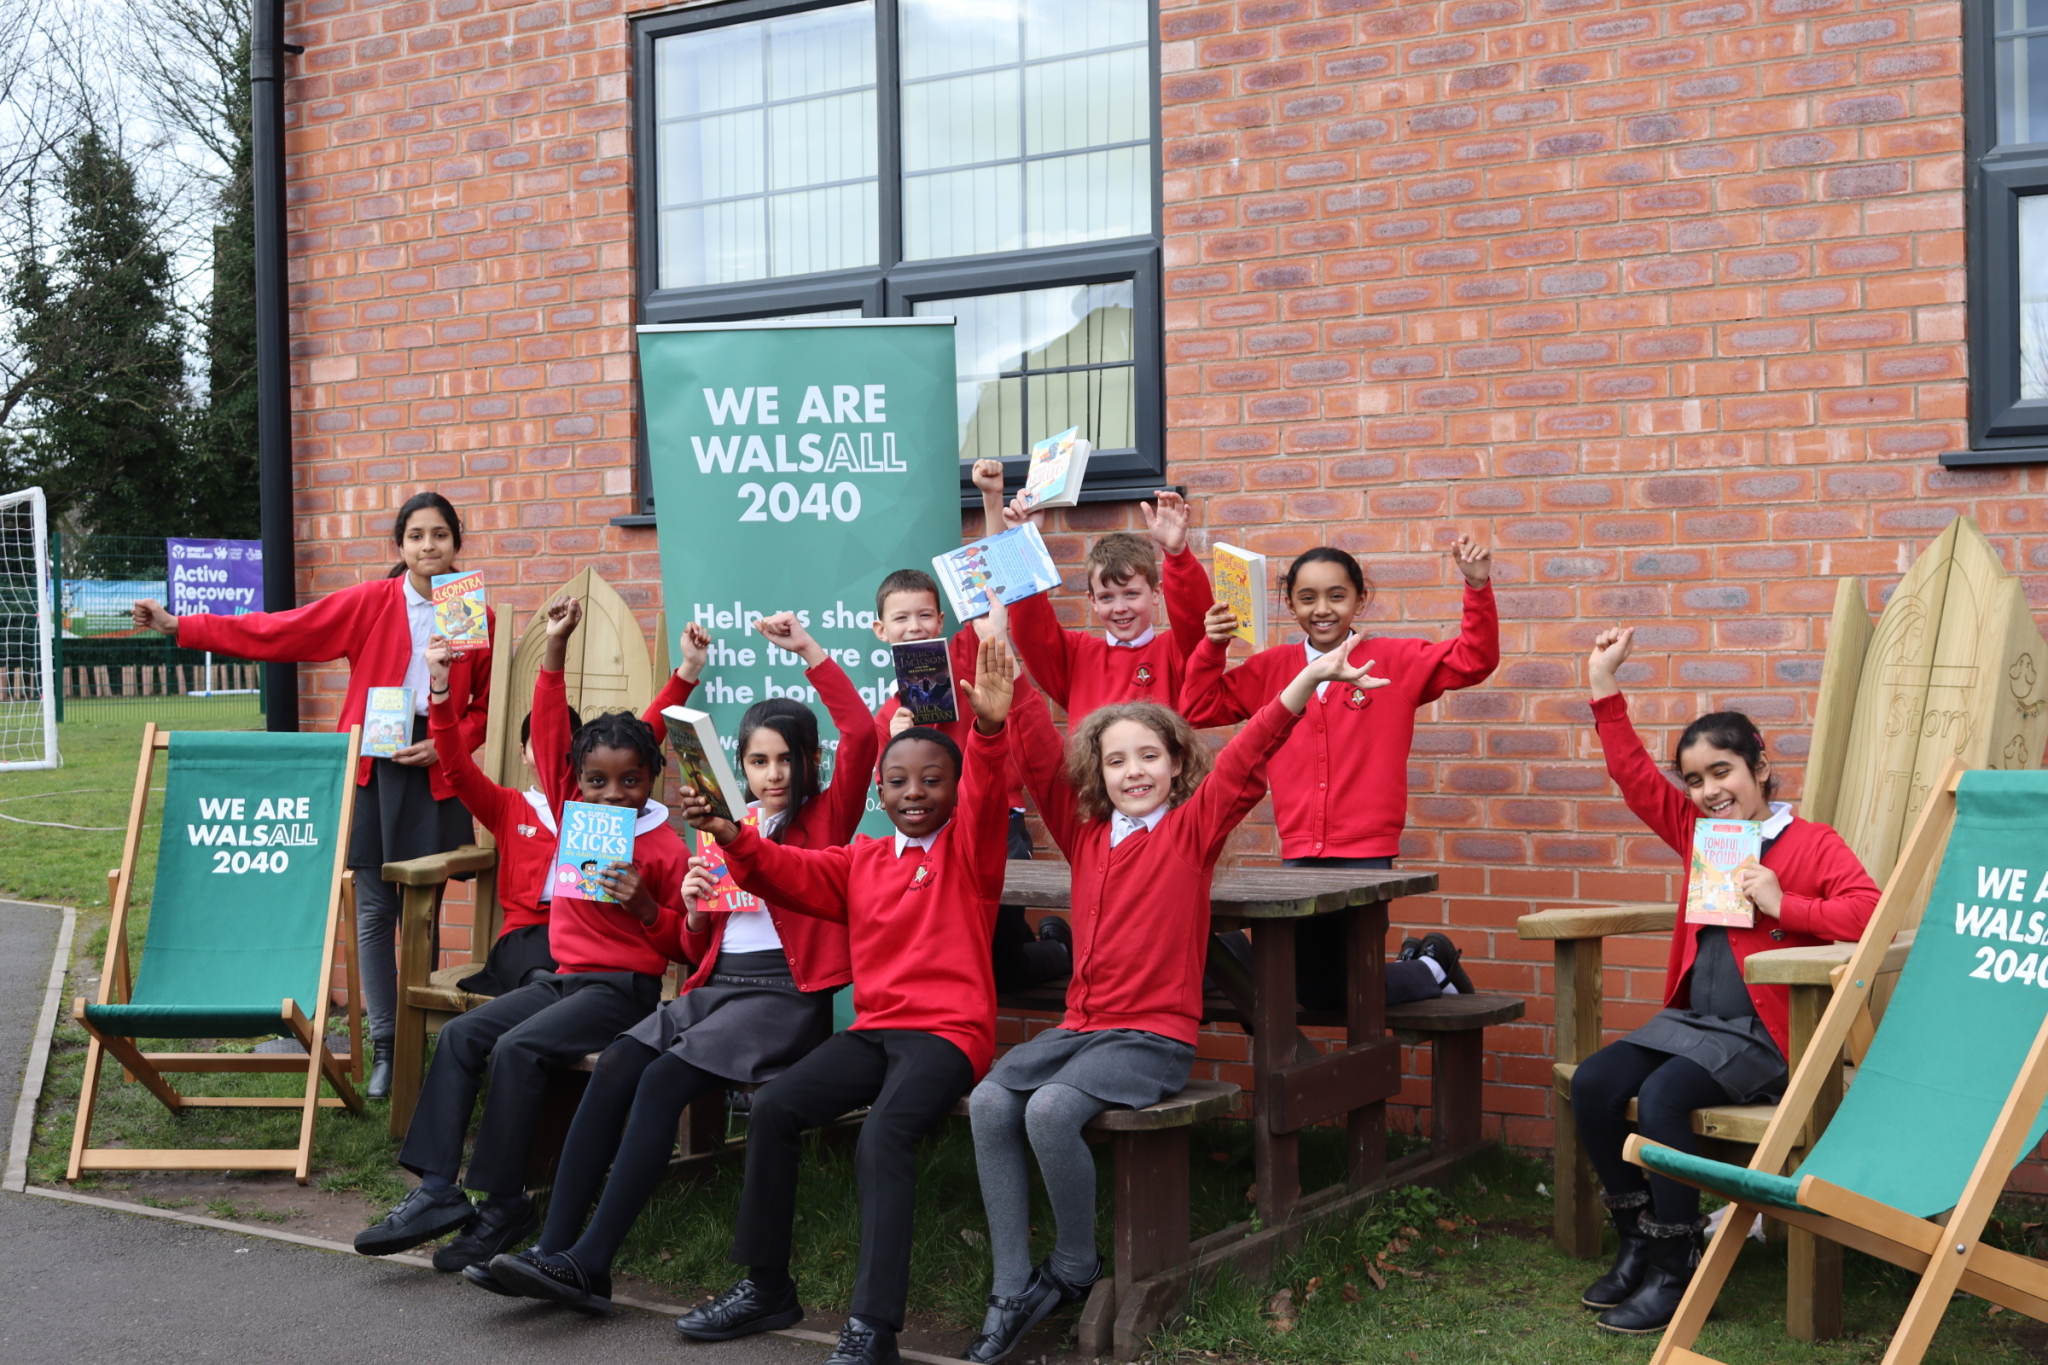 A group of school children in red jumpers sitting outside holding books and cheering